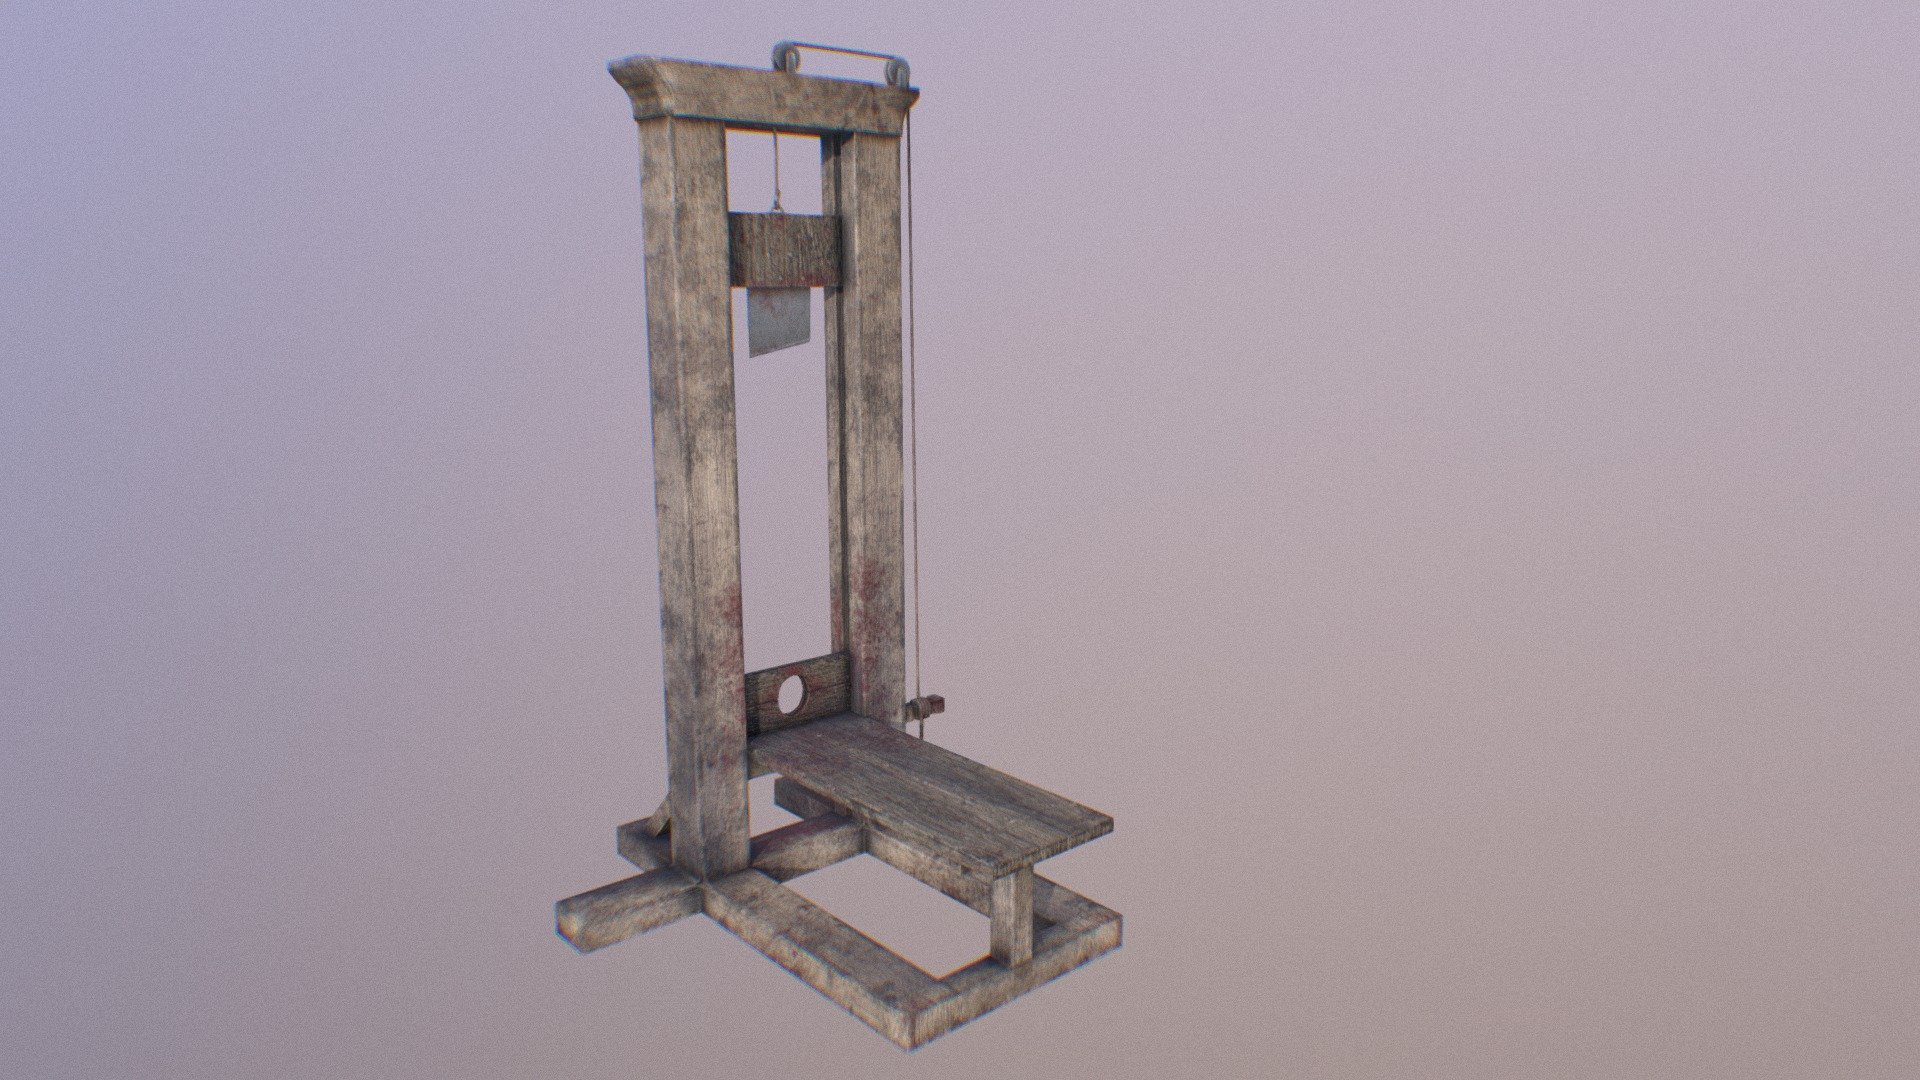 Qud/tris only polygon - 1849 count 
Tris count - 3558
High quality 4096x4096 resolution PBR (metal roughness) textures
- Albedo;
- Normal map;
- Ambient oclusion;
- Roughness;
- Metallic 3d model